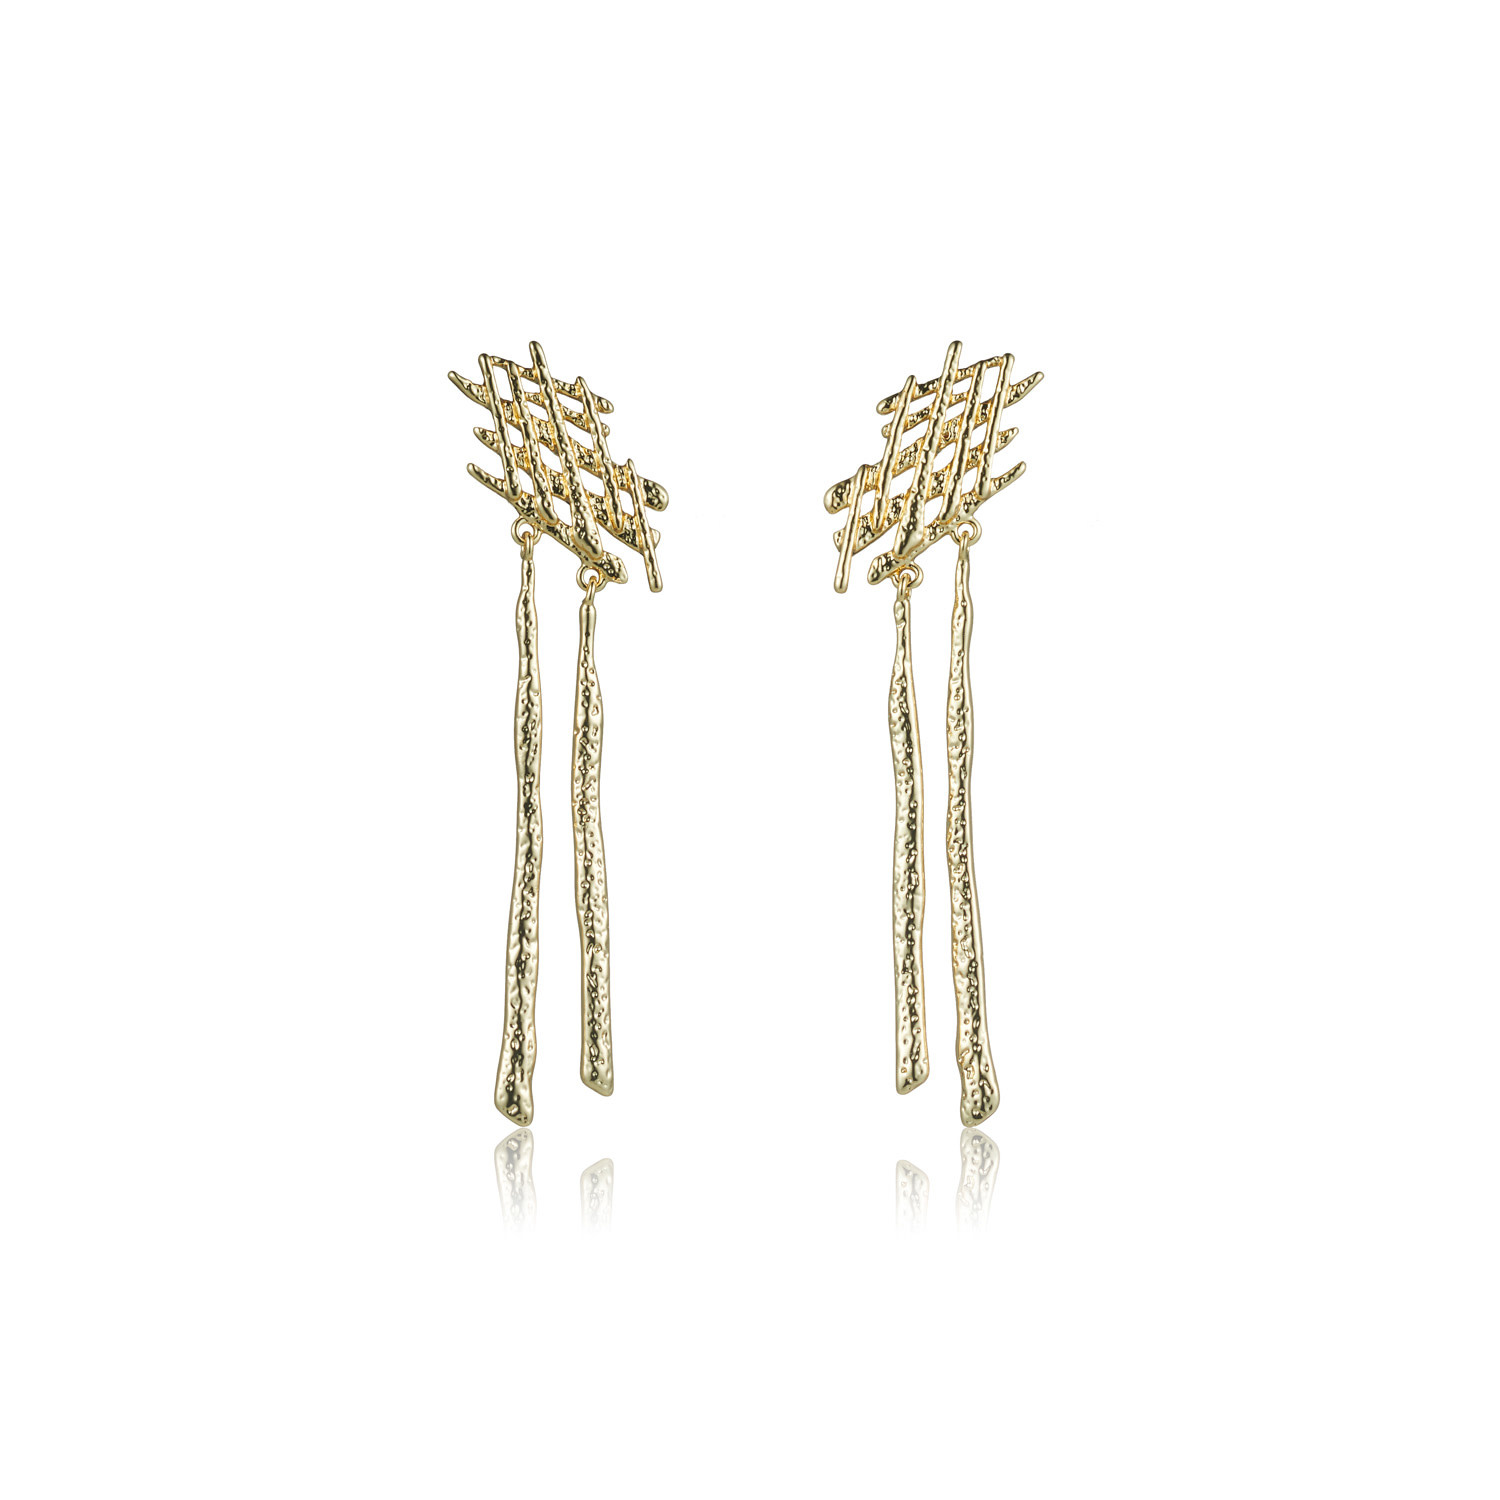 Cinnamon Earrings -  Brut Baum Collection -14ct Gold Plated Earrings with Double Drop 5cm  - Sarina Suriano for BECKER MINTY-1